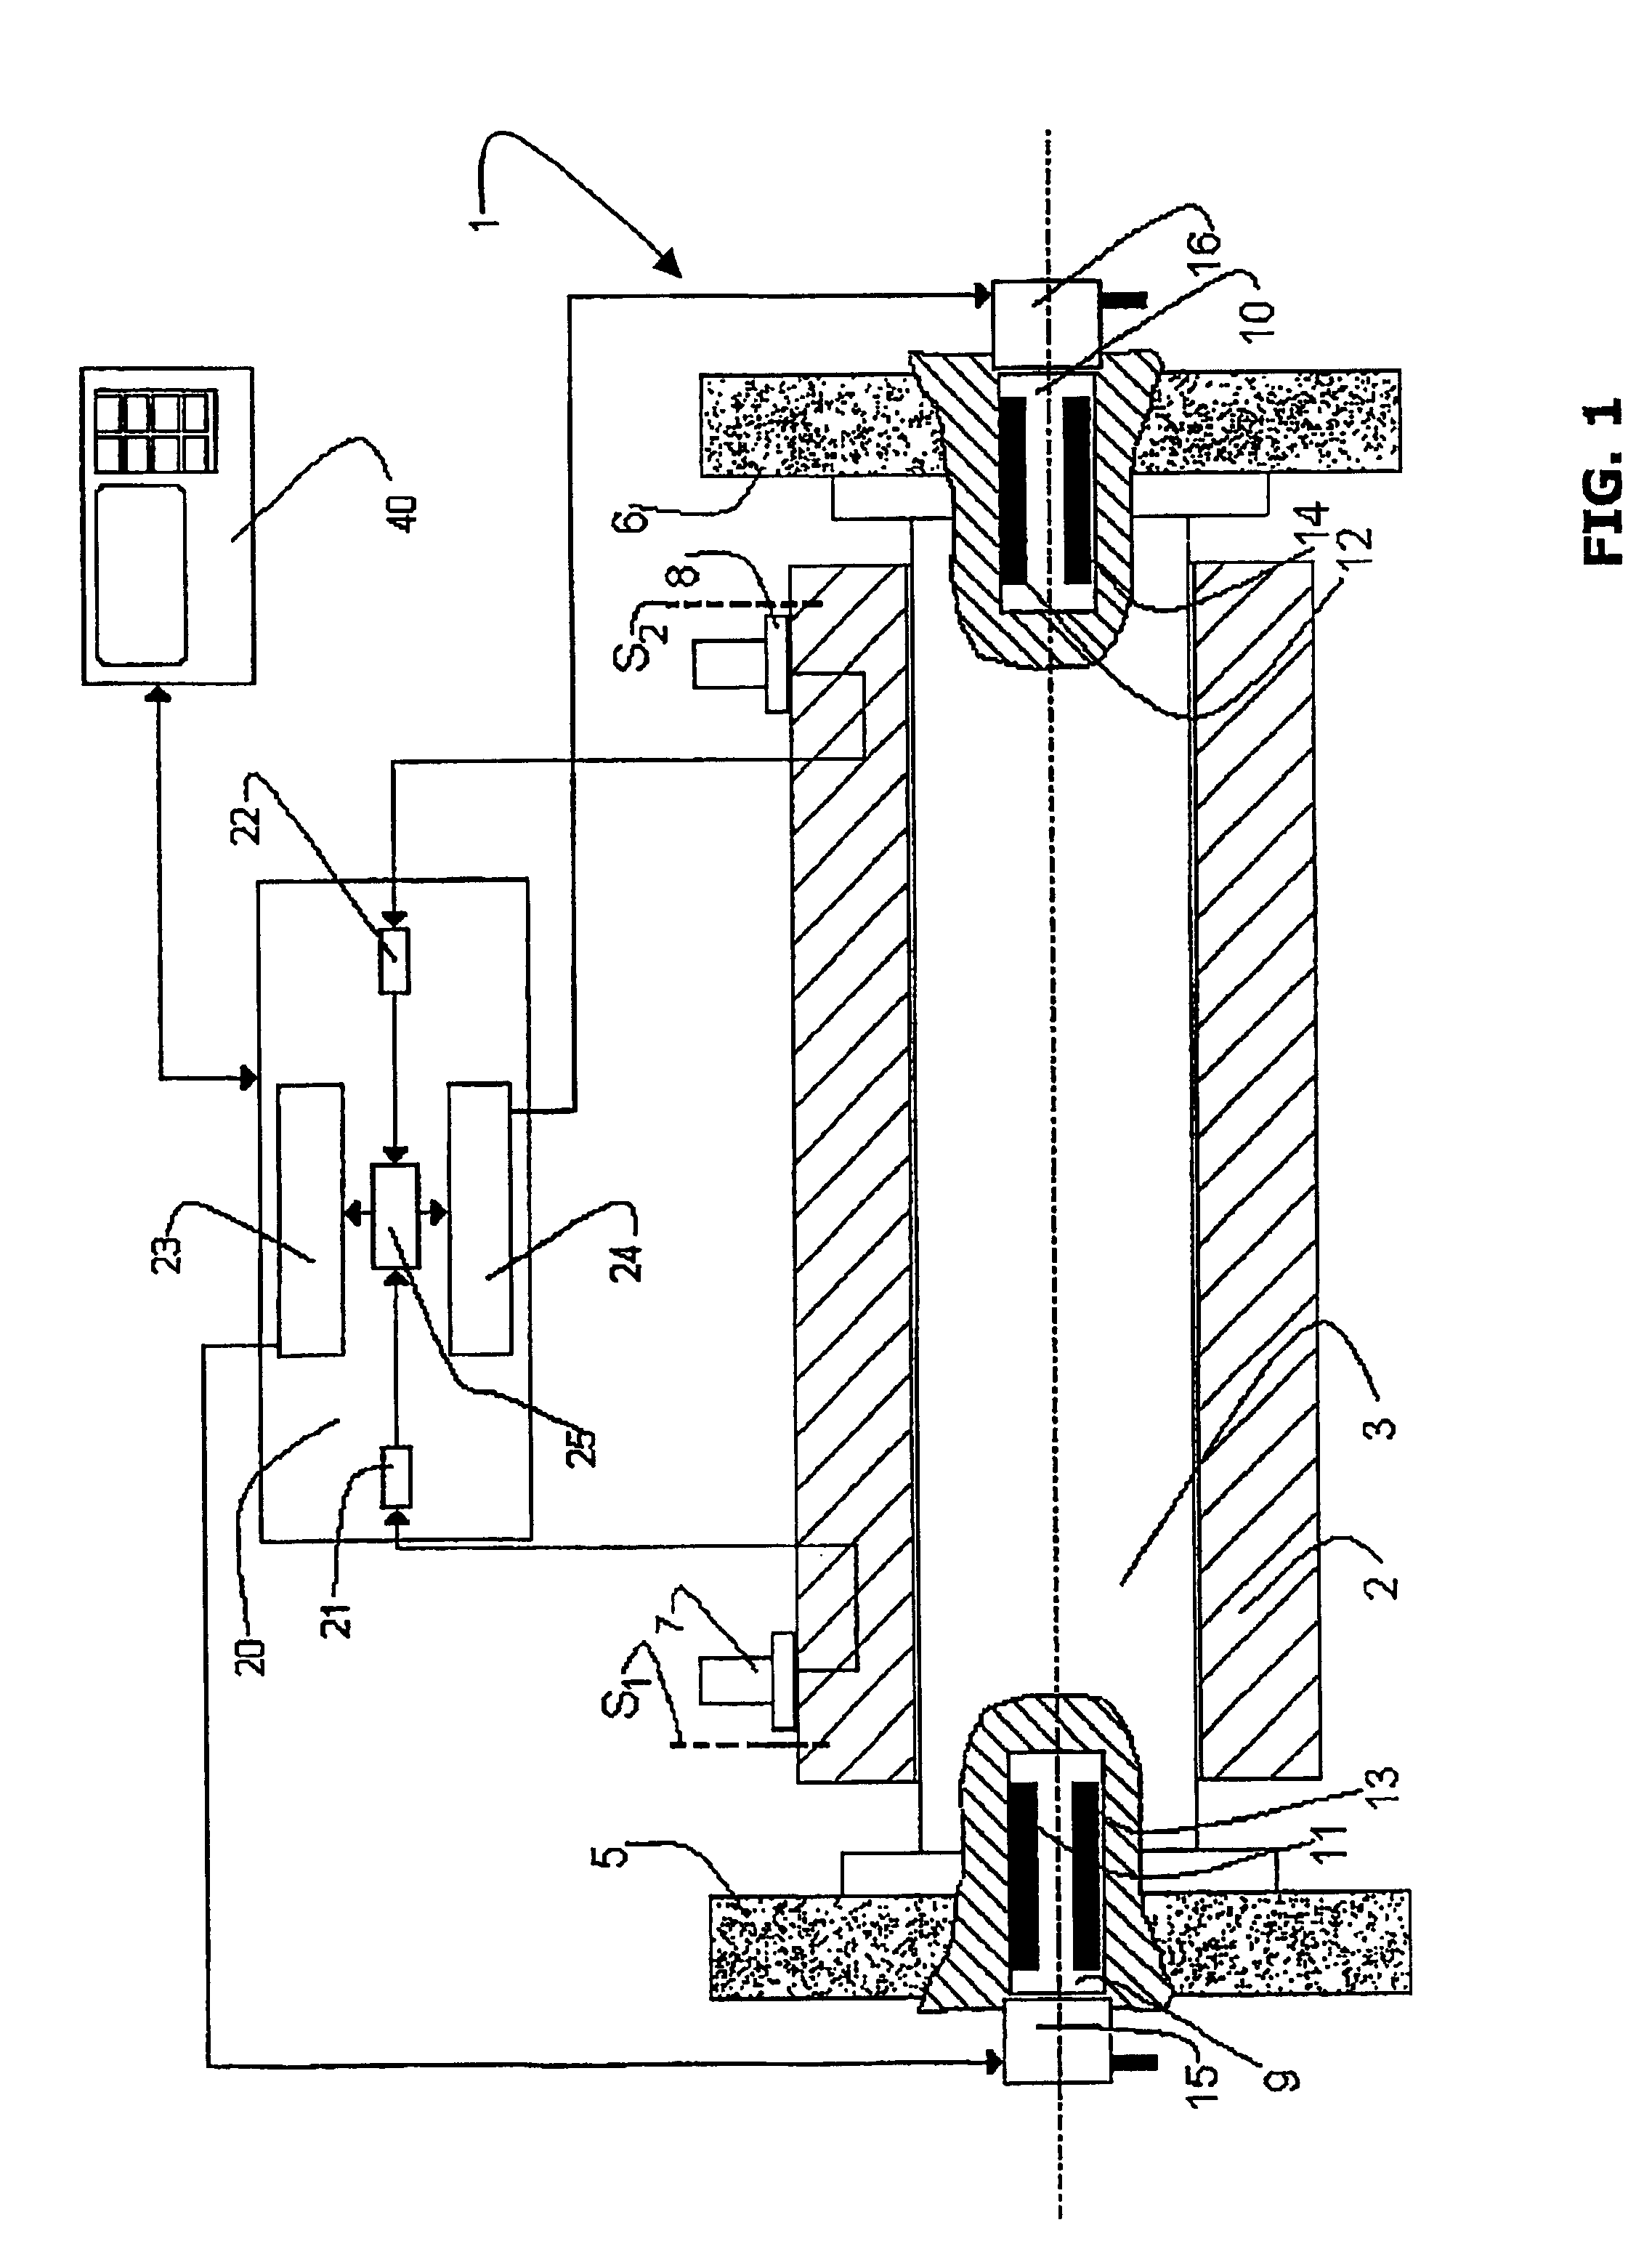 Method and apparatus for the dynamic balancing of a rotating structure